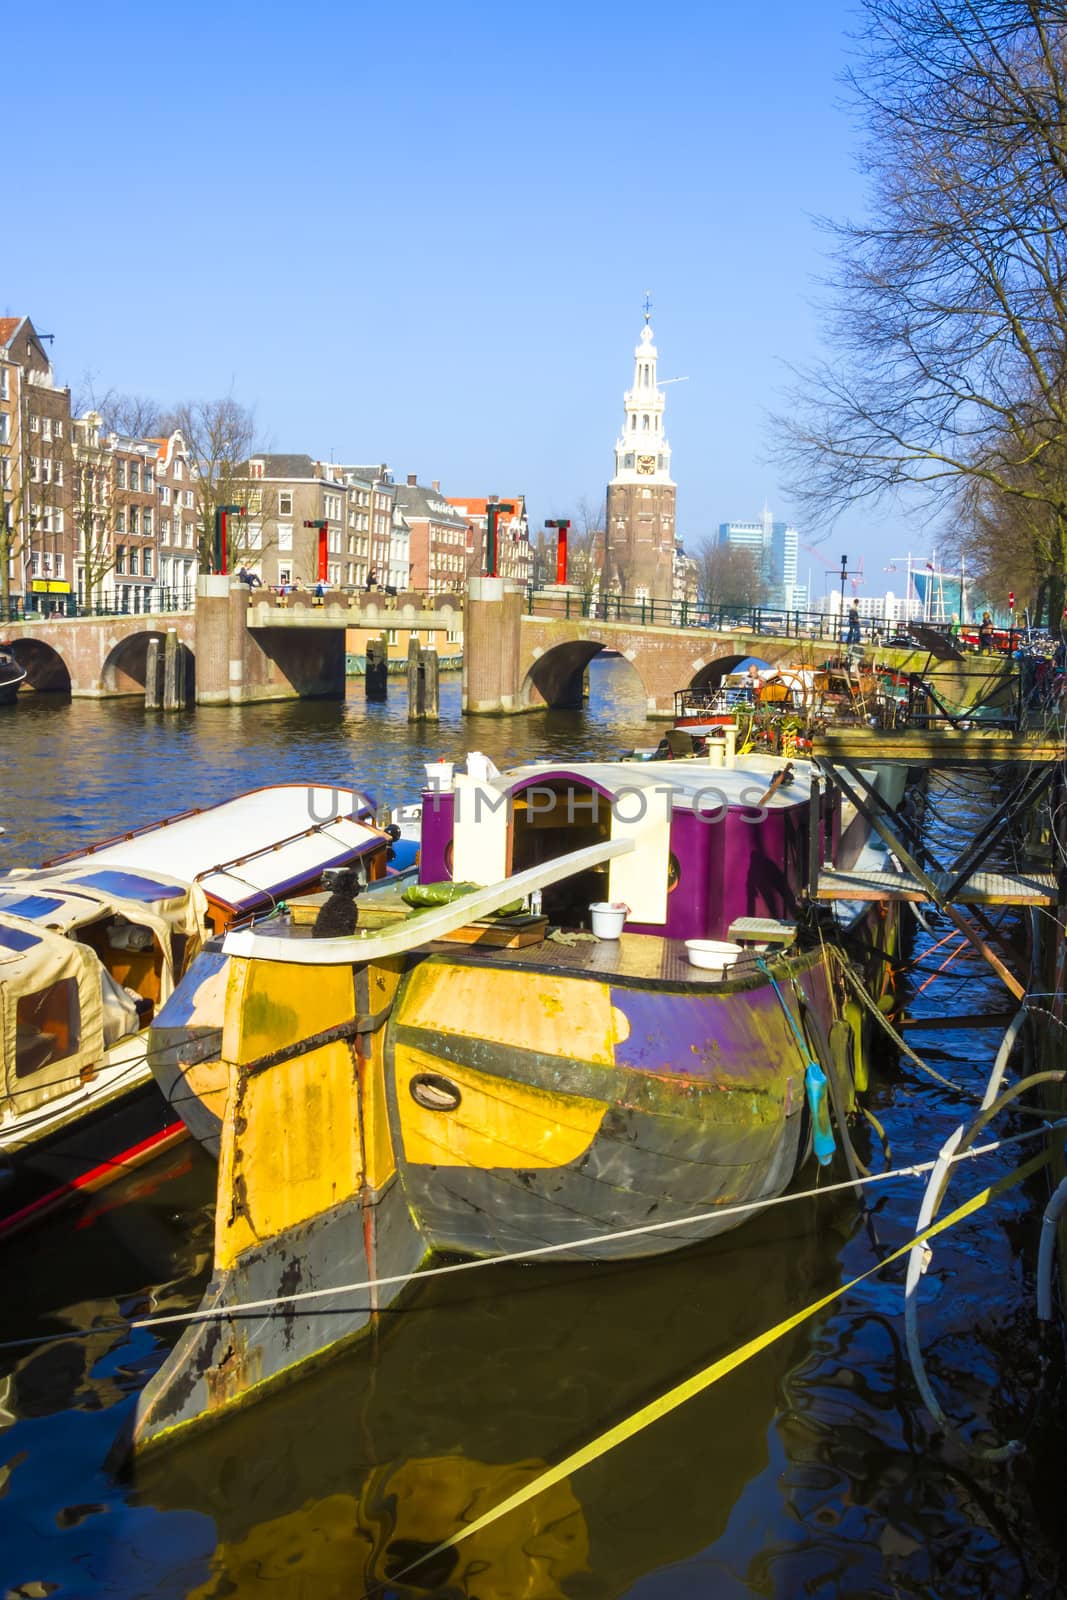 Typical Amsterdam canal with boat houses and a bridge